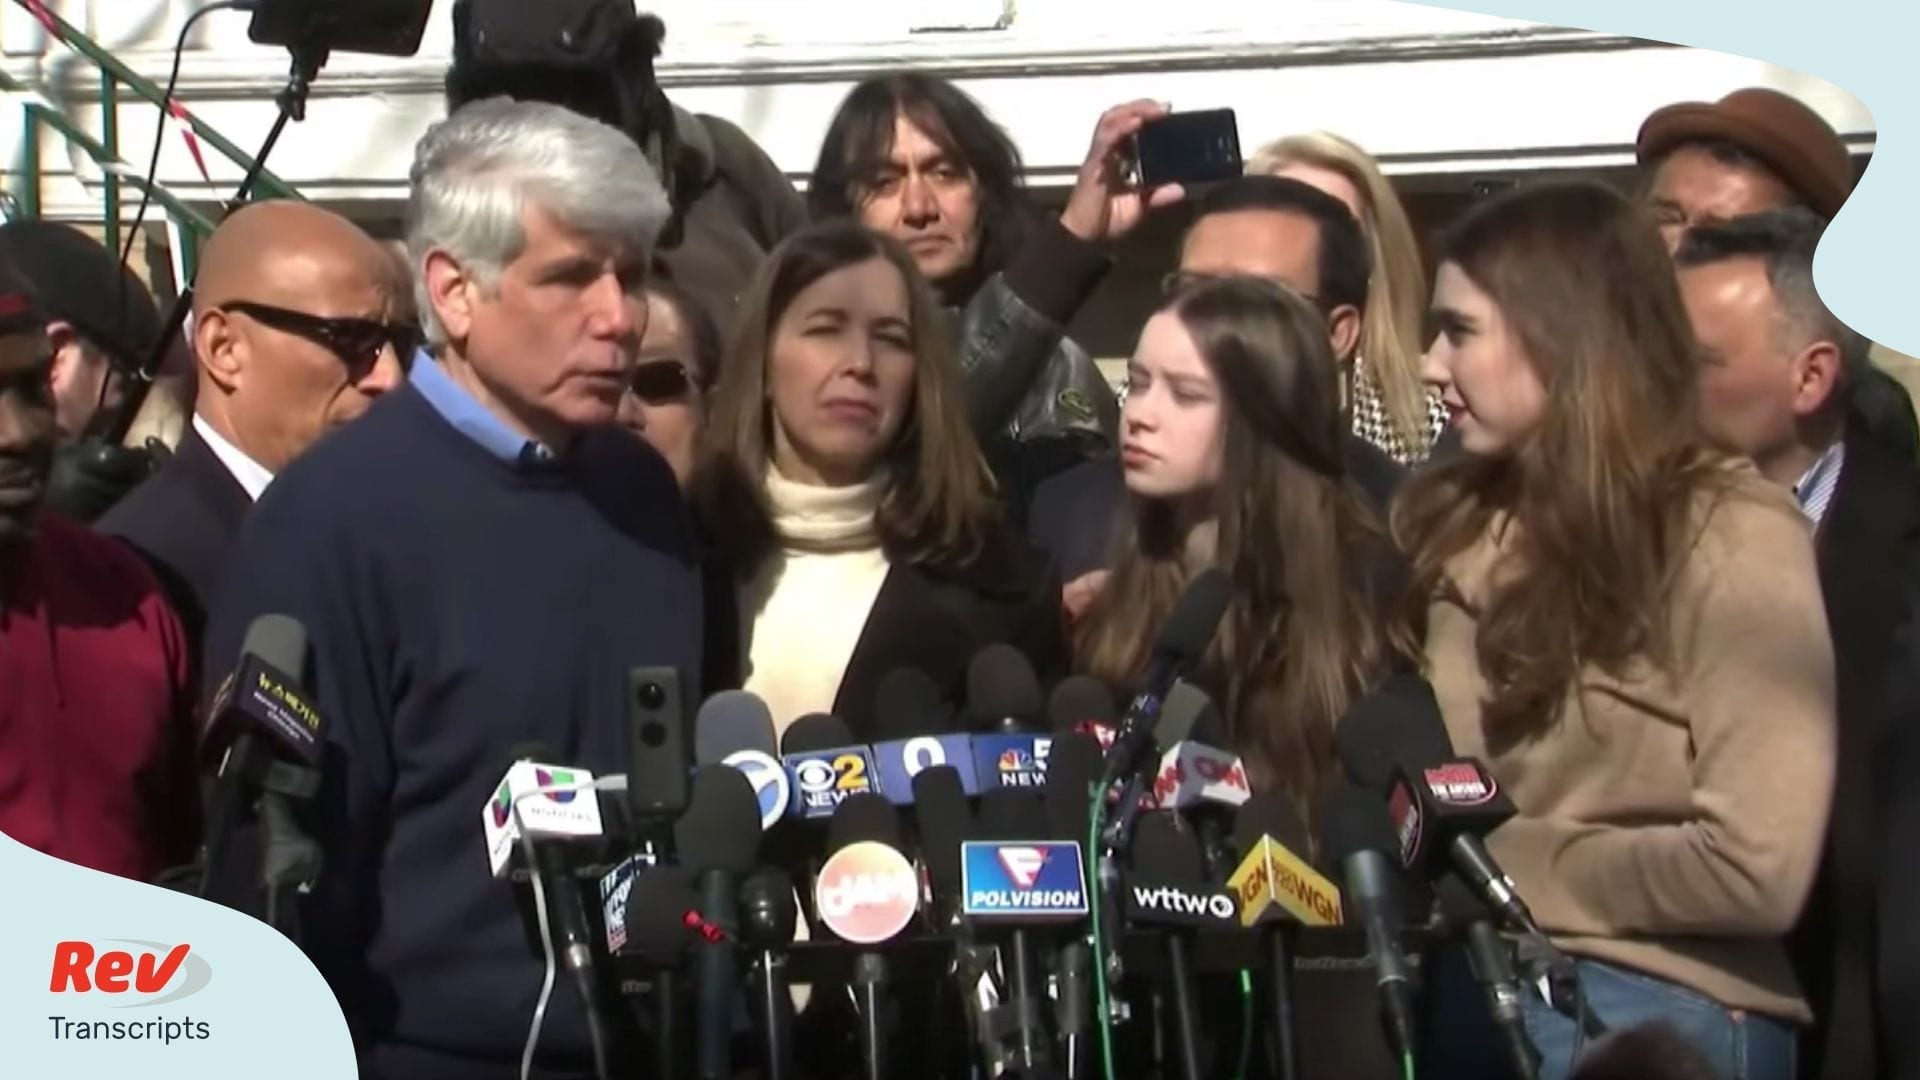 Rod Blagojevich speaks to reporters after being granted clemency by Trump transcript